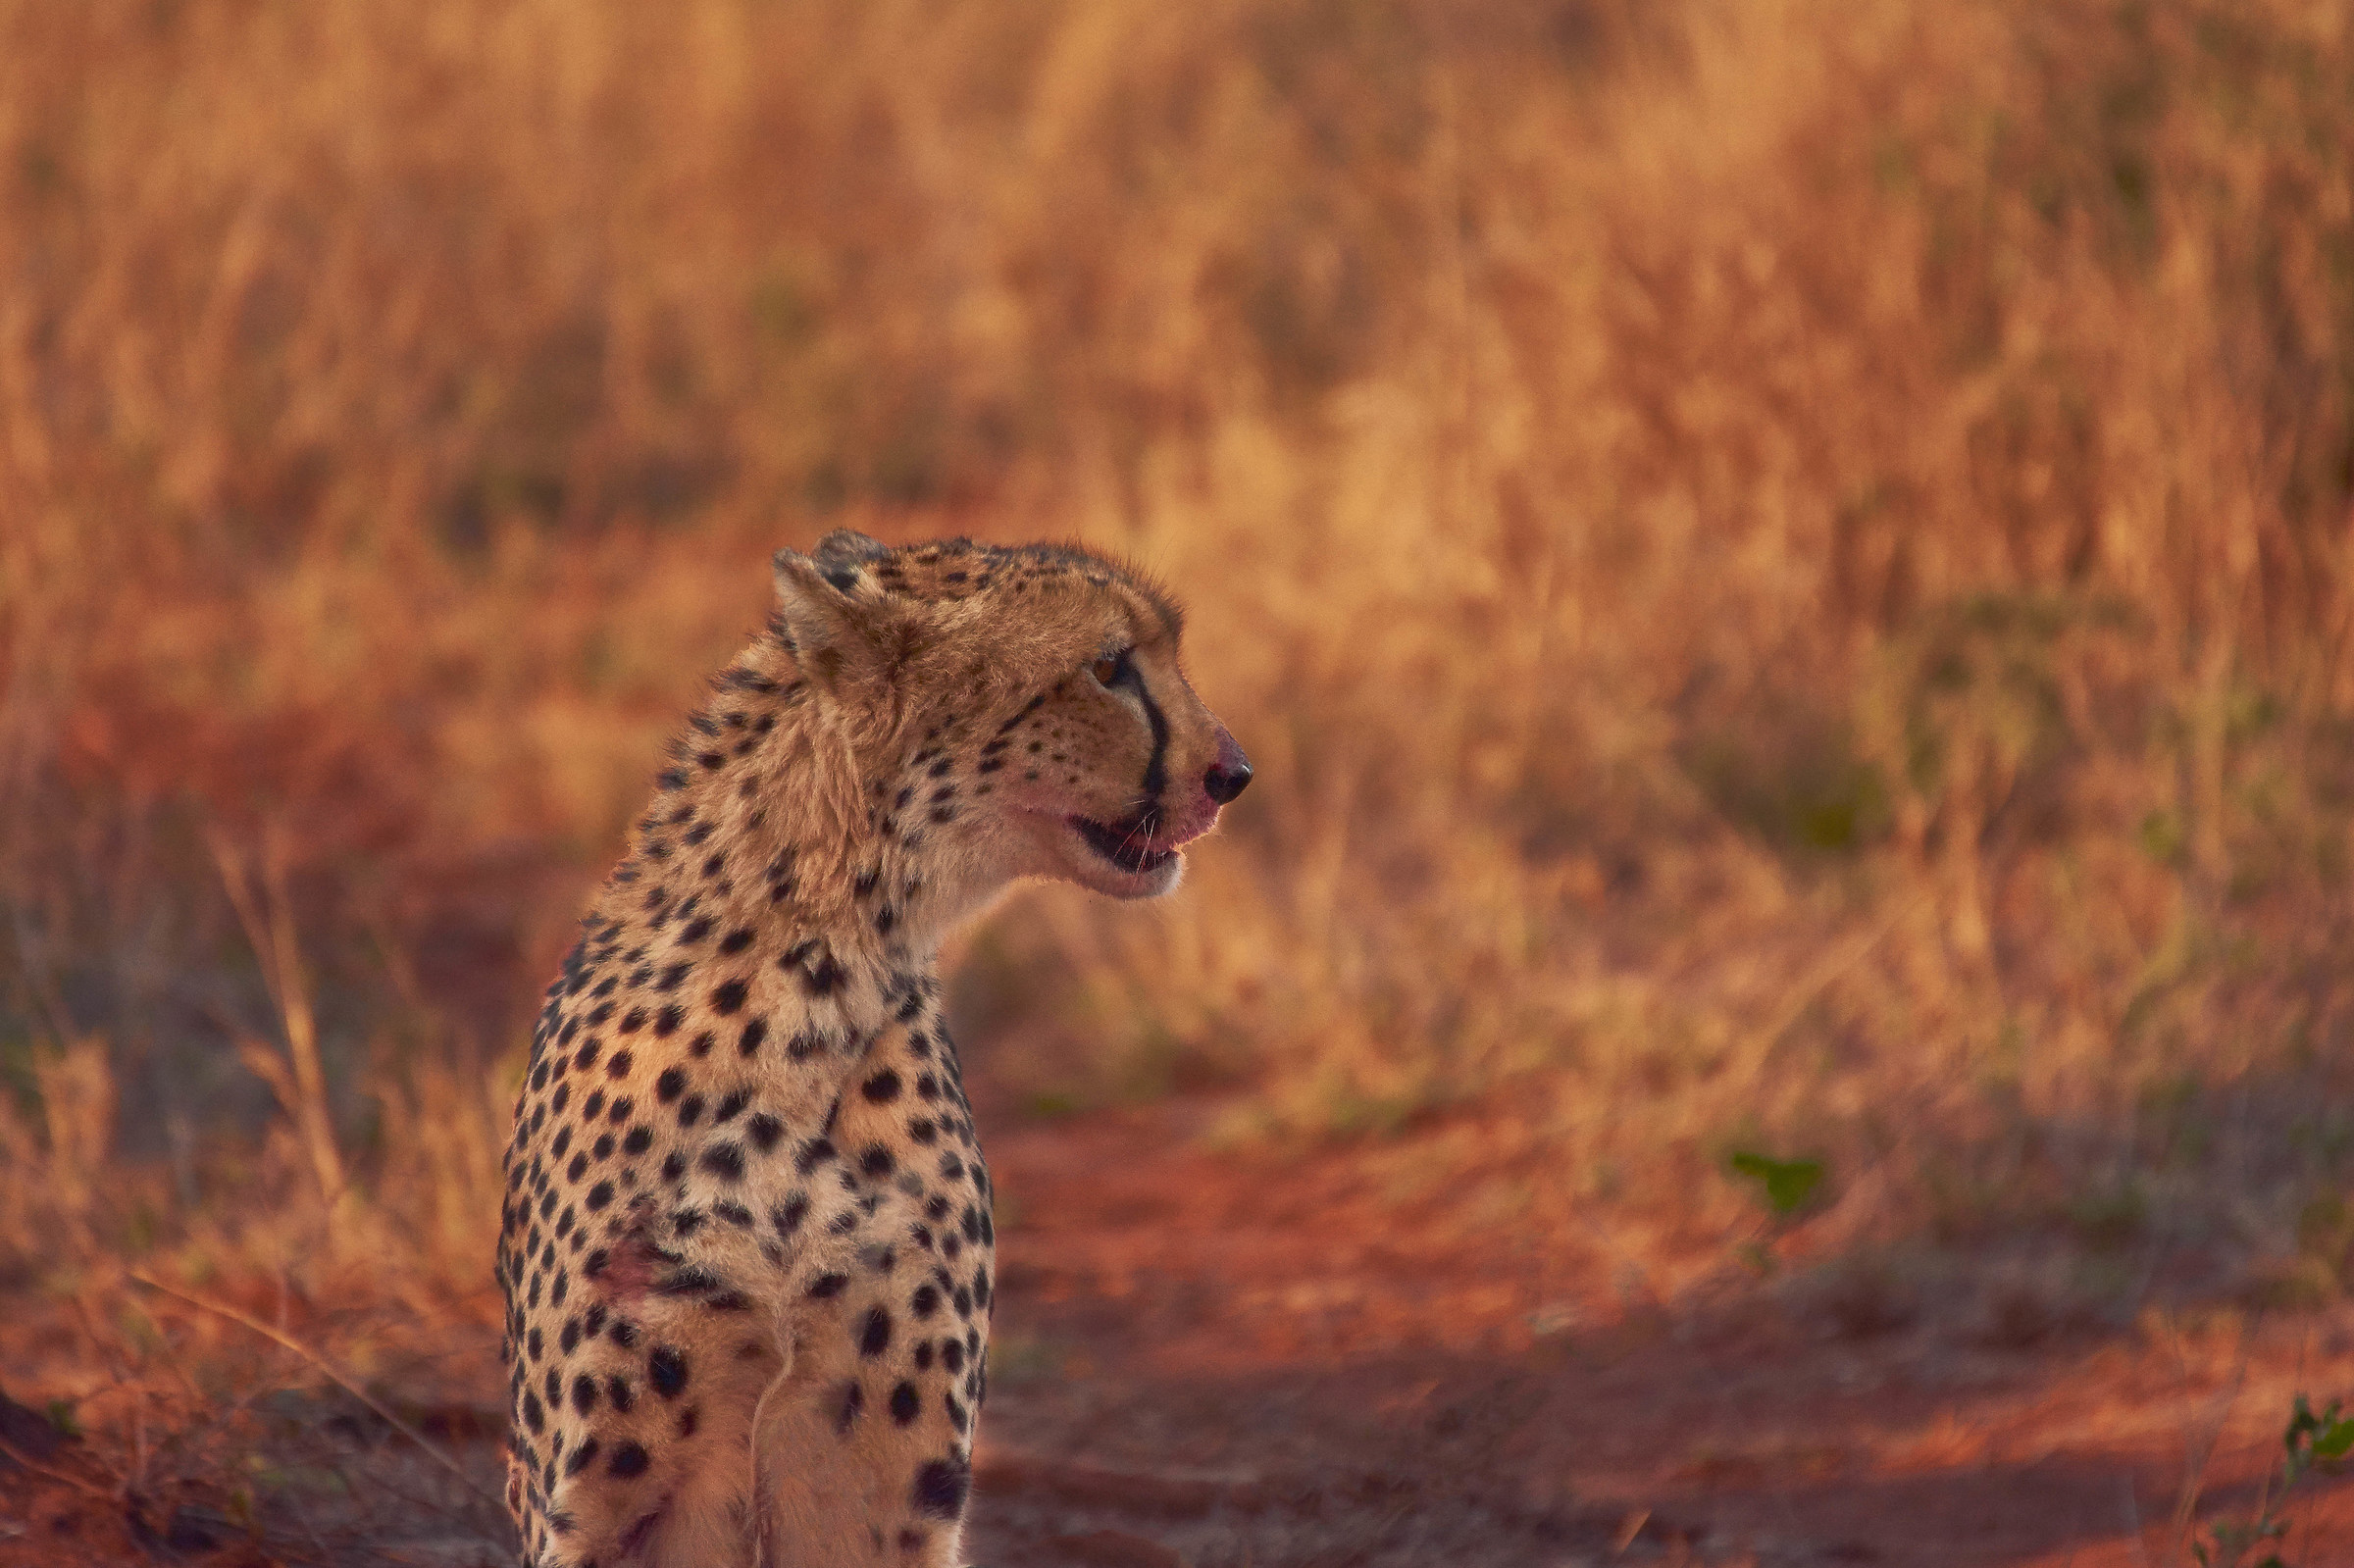 Cheetah after dinner at the Kruger!...